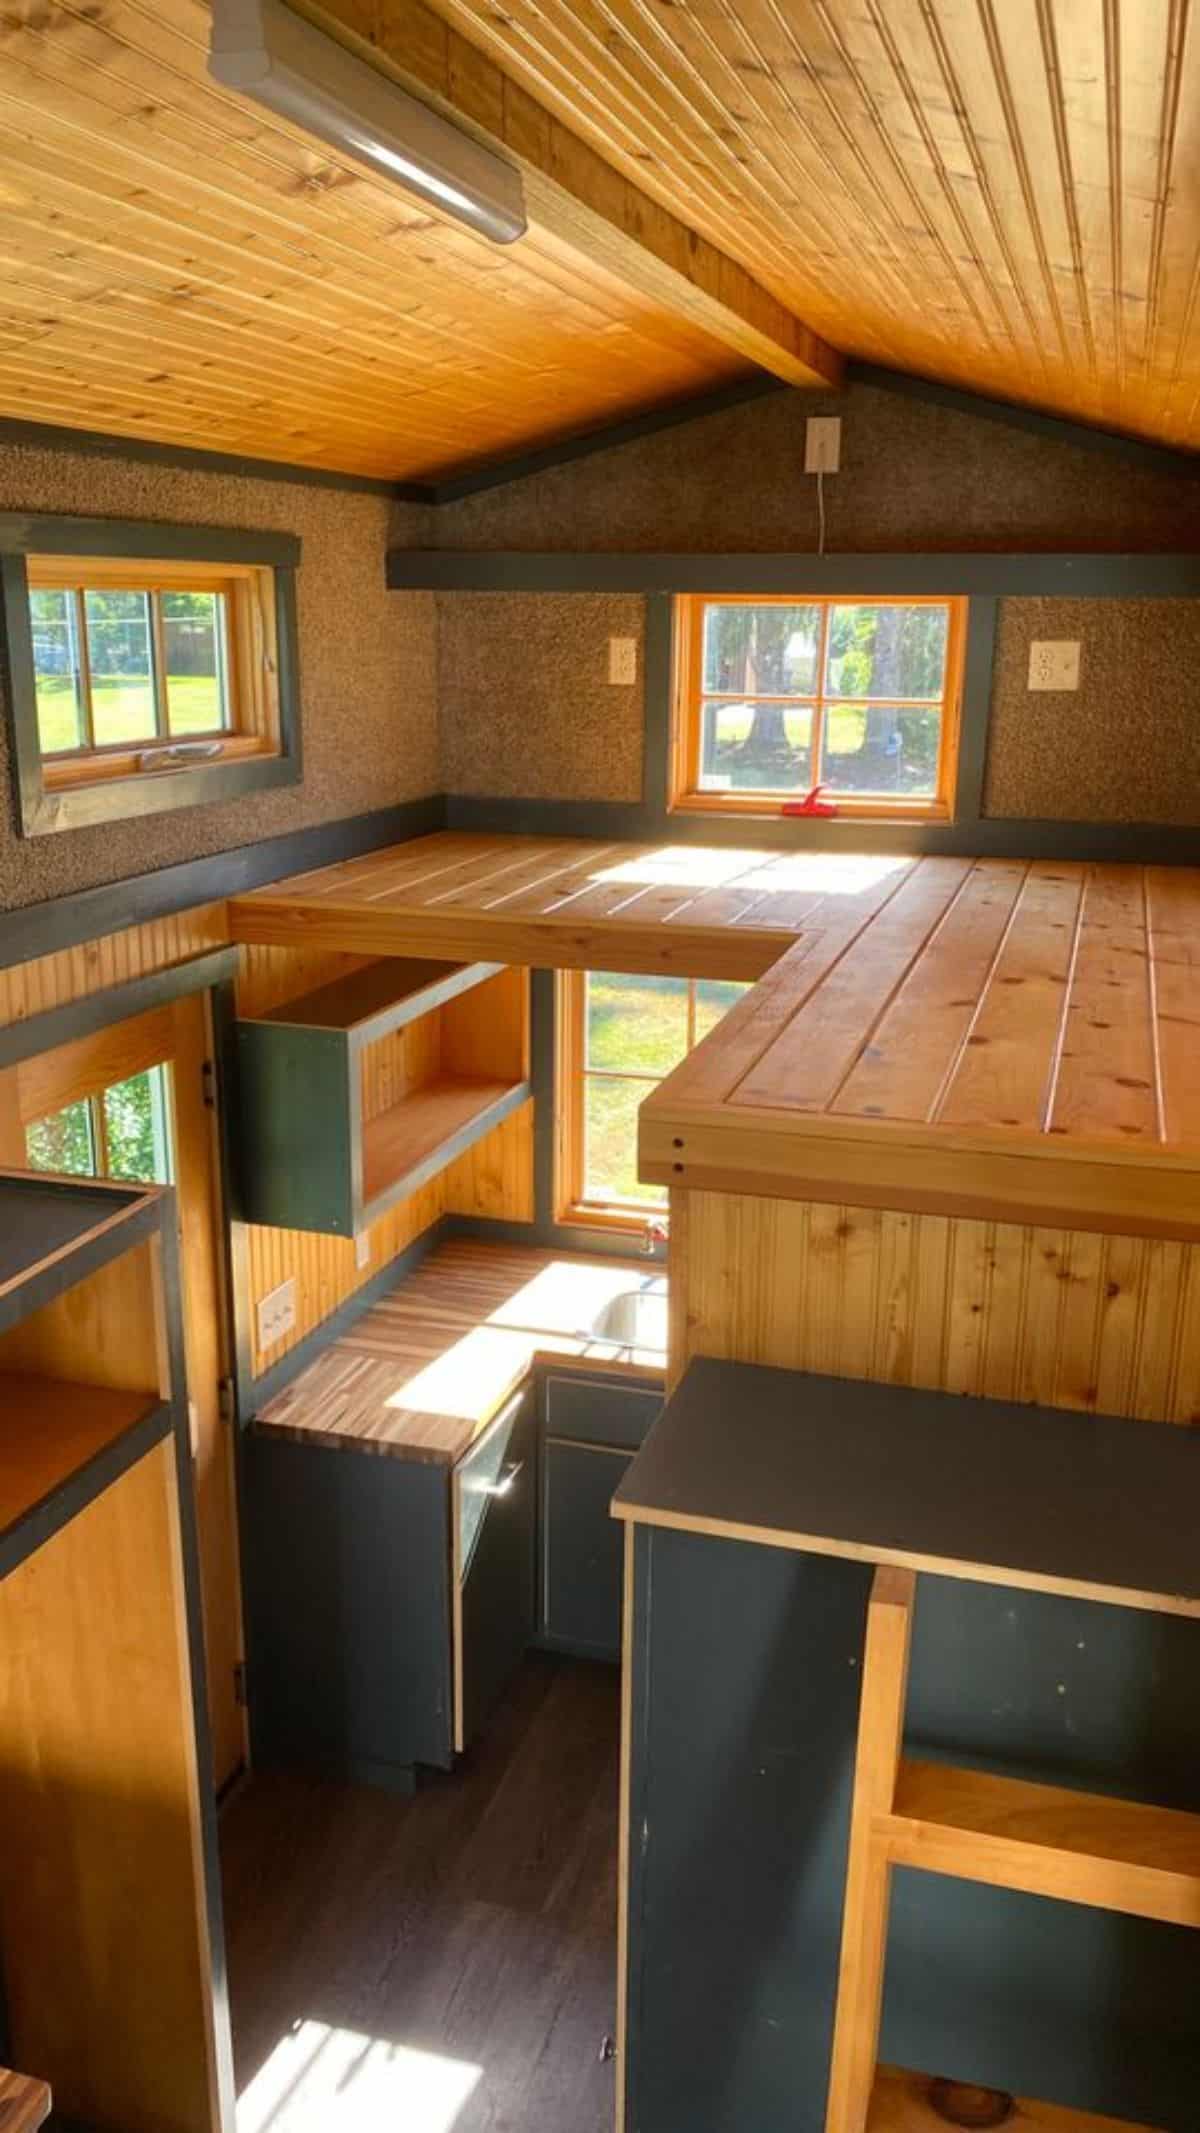 Loft 2 of 20’ Cozy Tiny House is above the kitchen area